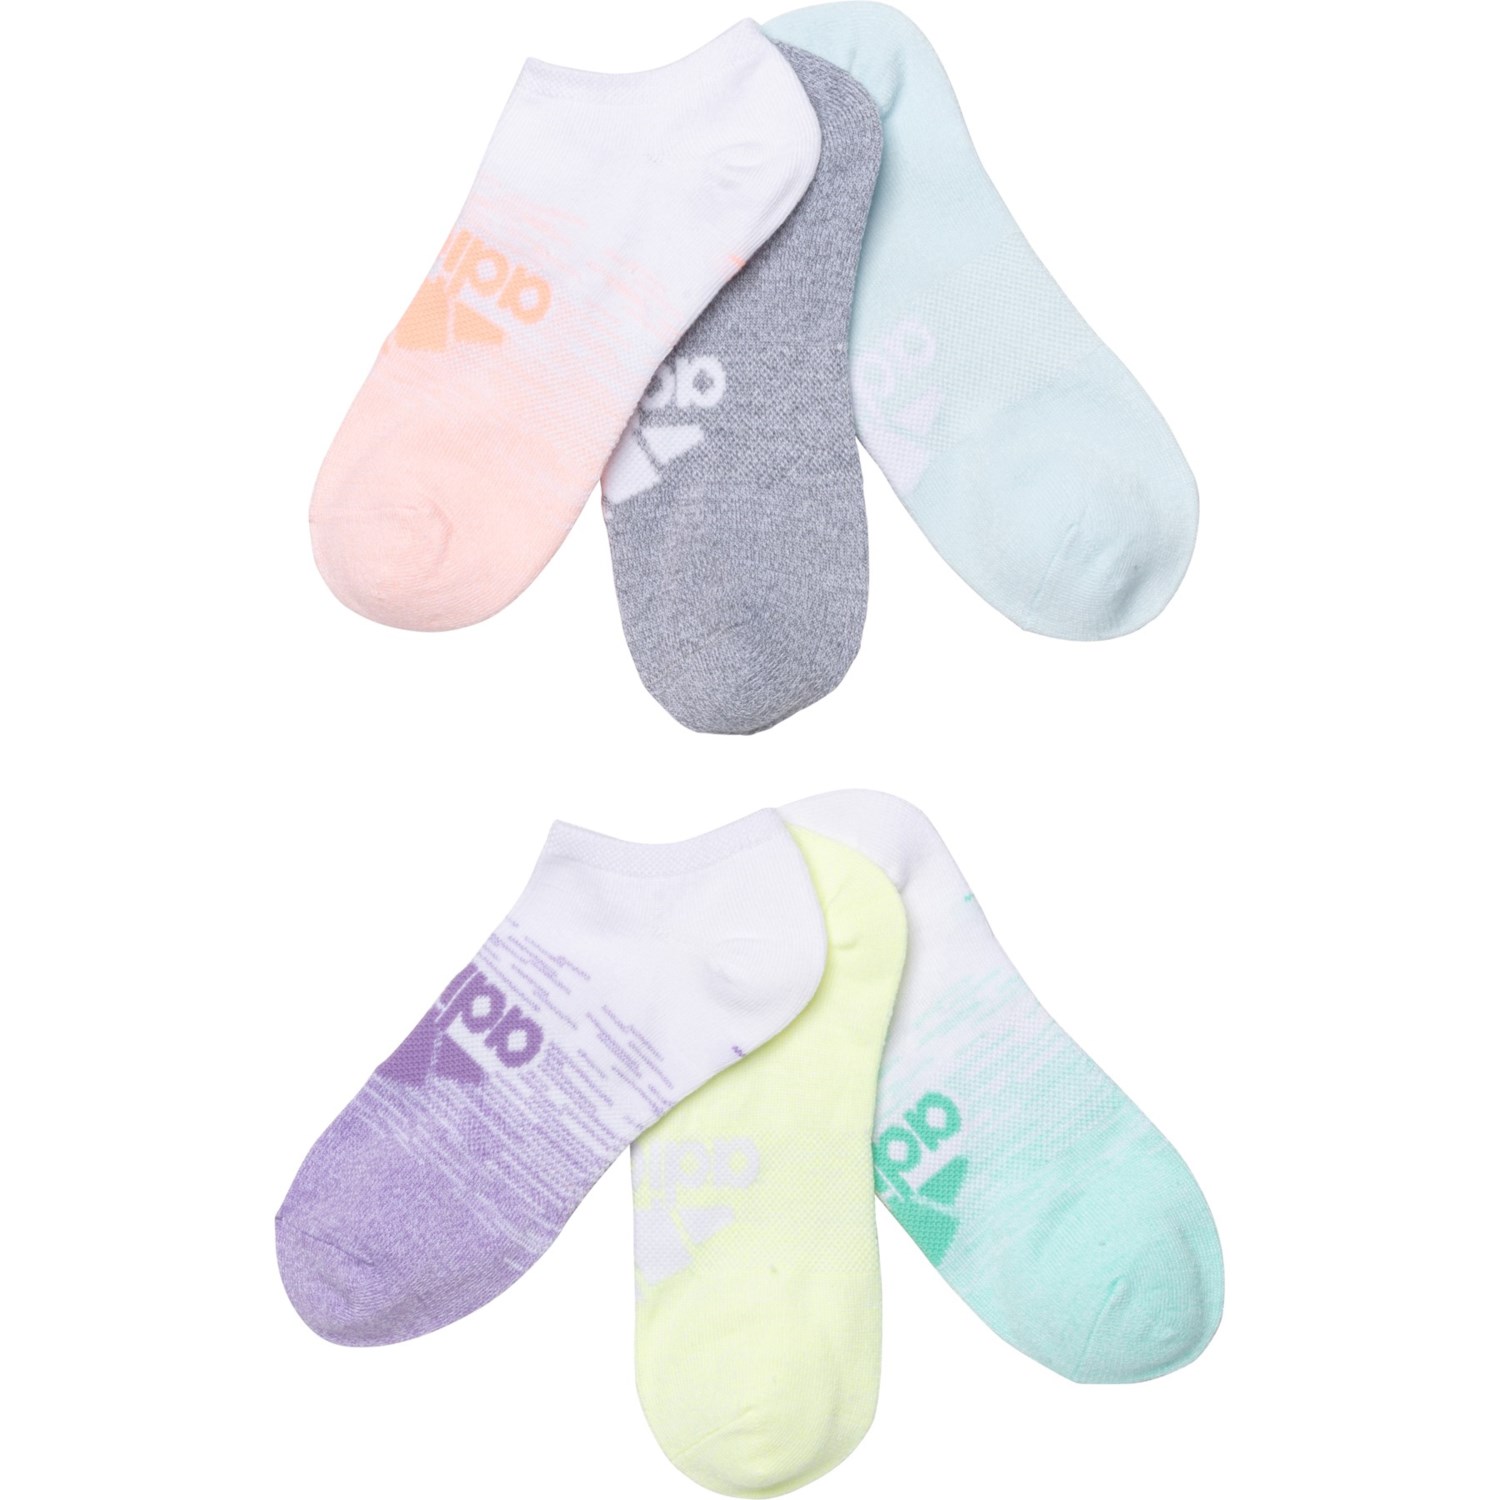 Adidas Superlite Badge of Sport II No-Show Socks - 6-Pack, Below the Ankle (For Girls)